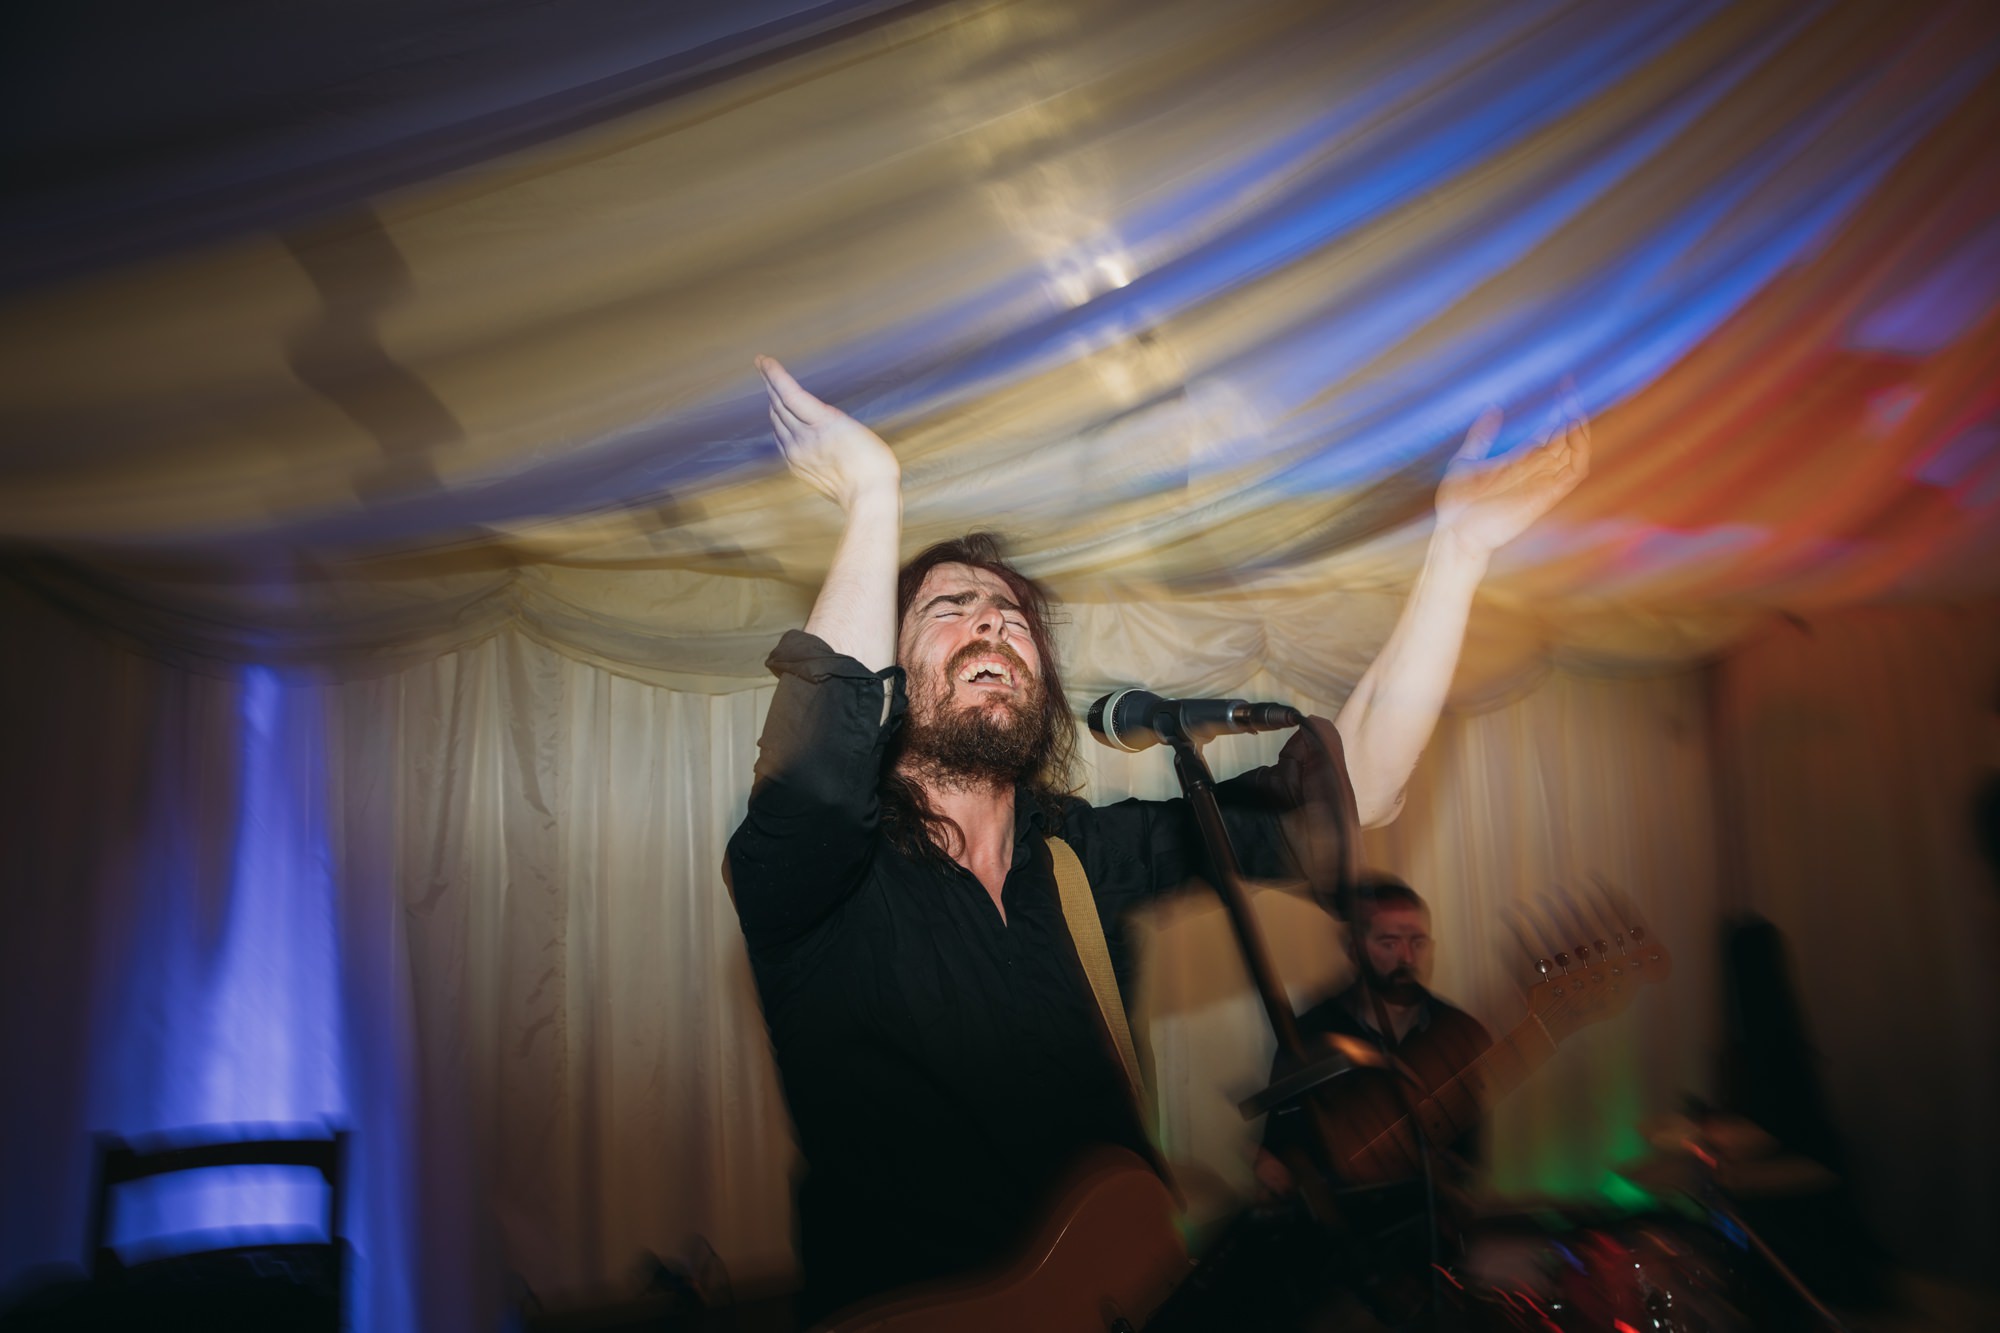 Tom McGuire & The Brassholes at a High Wards wedding